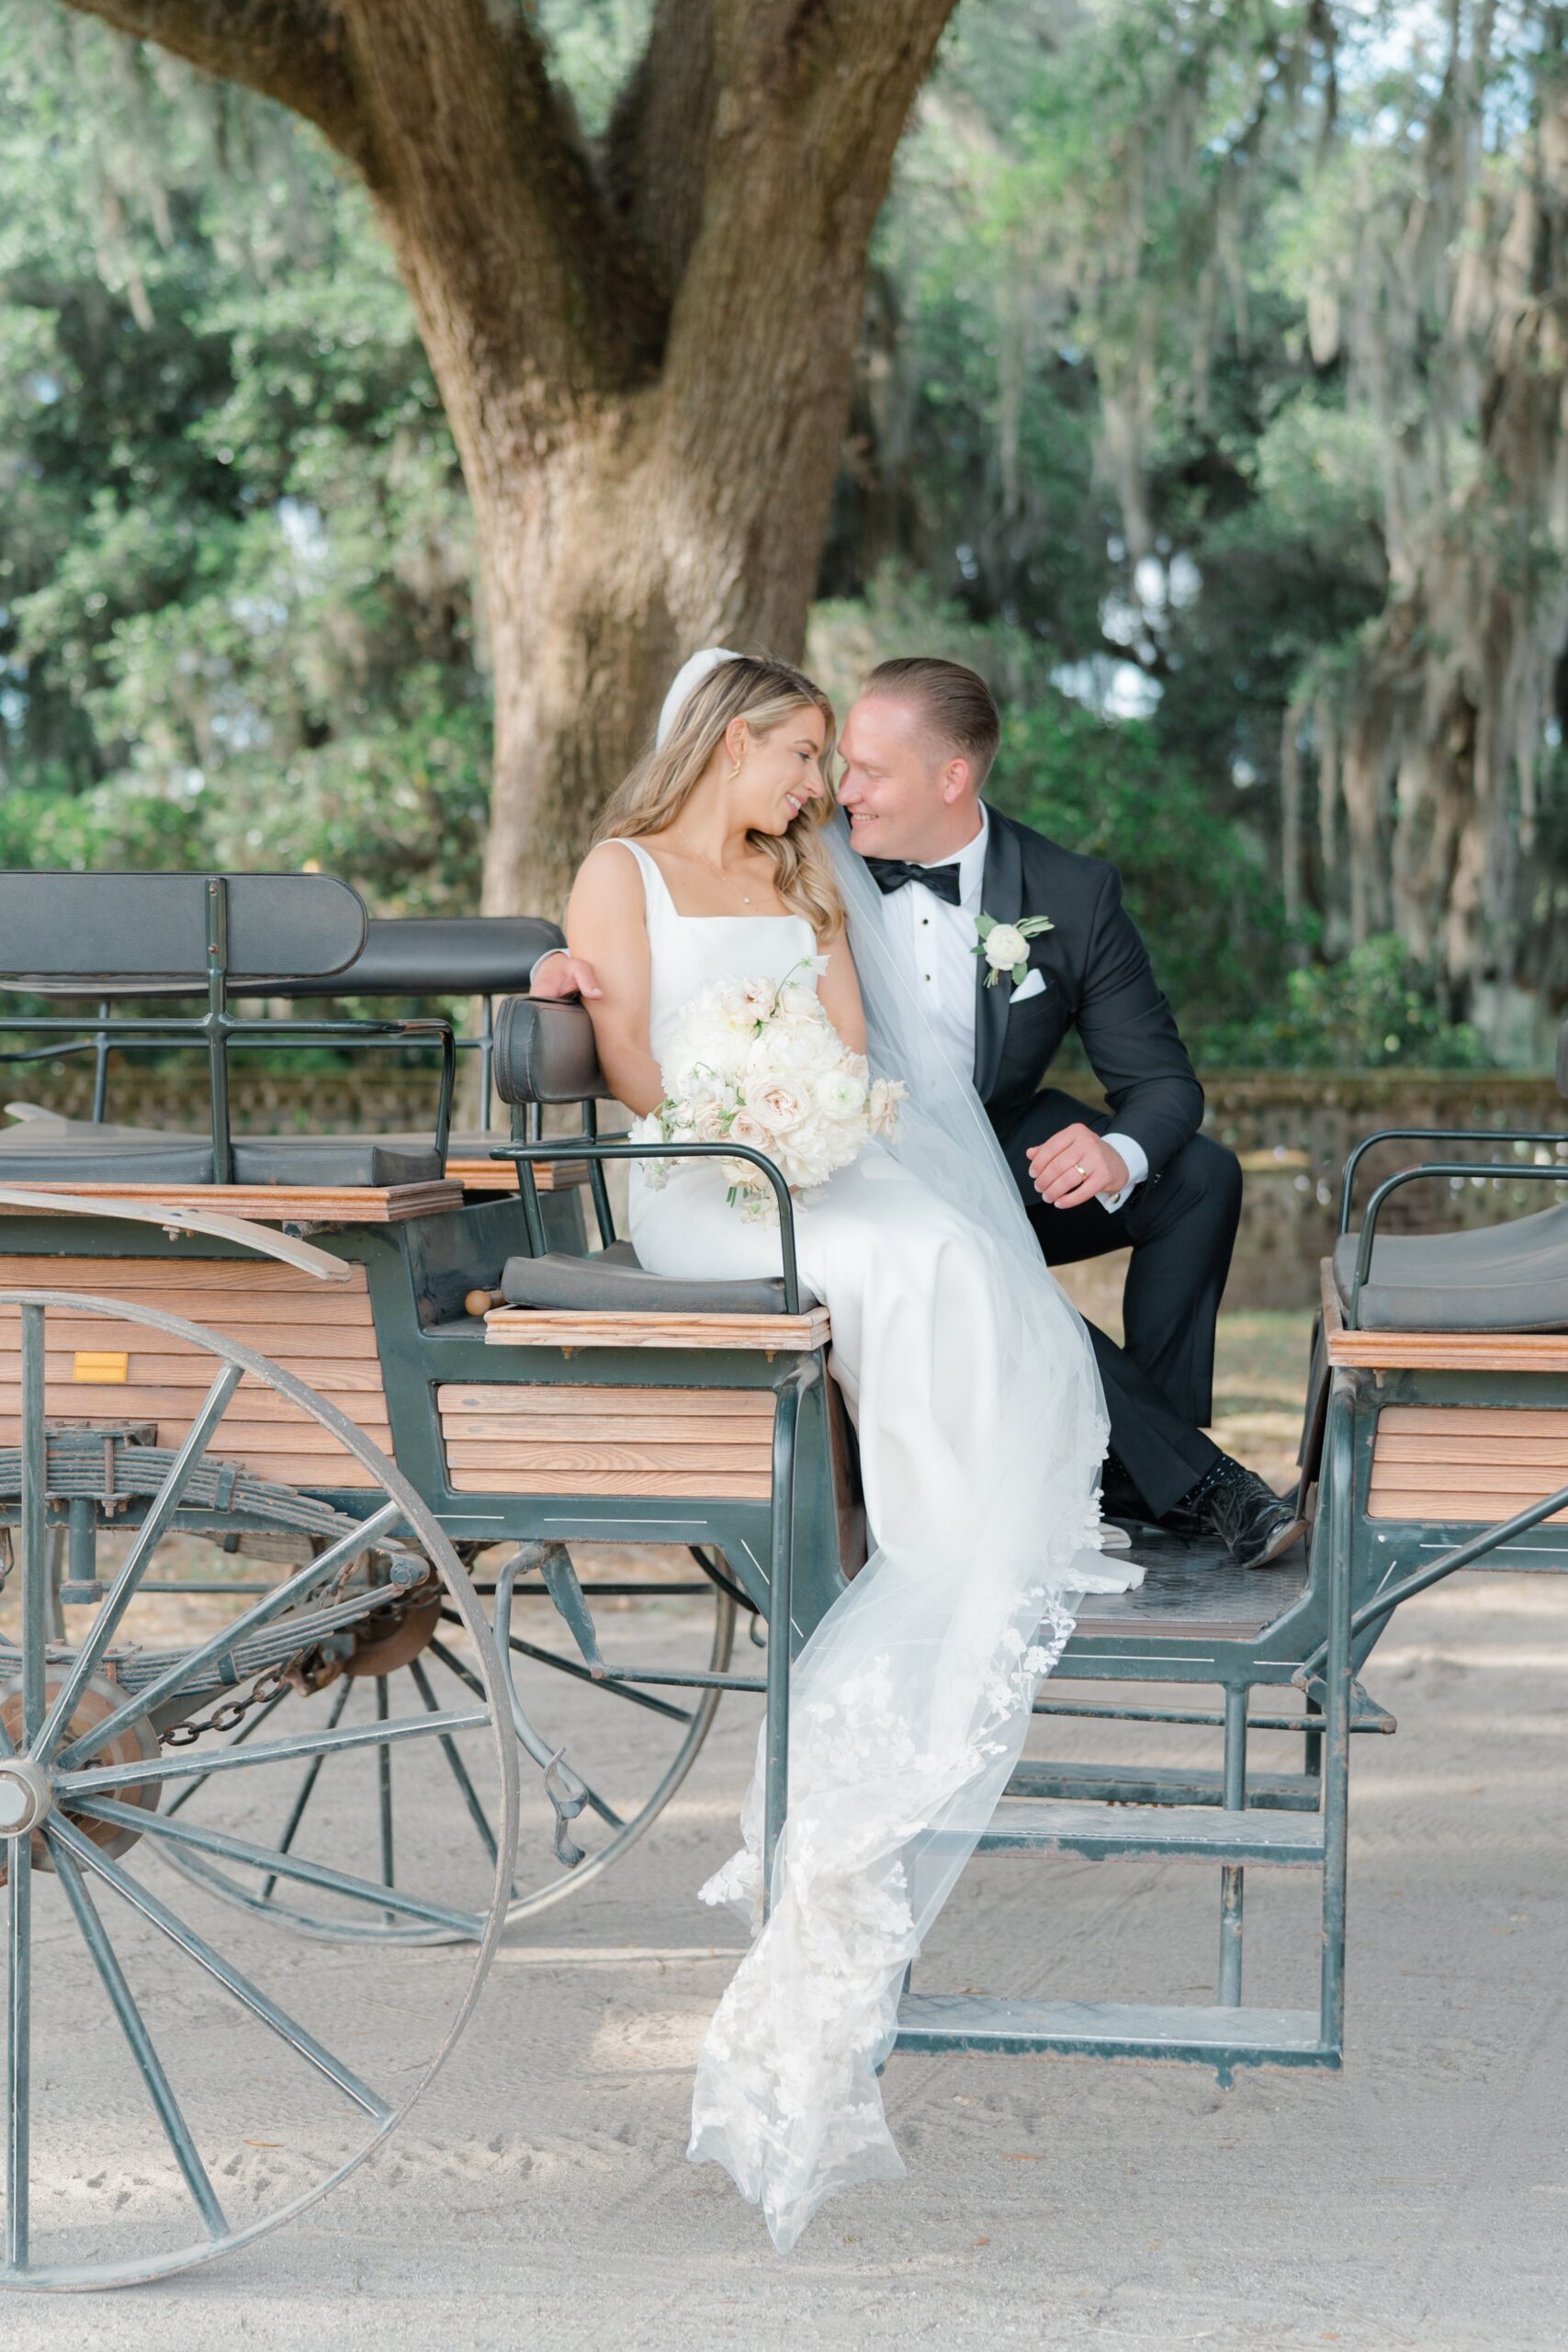 Middleton Place horse and carriage newlyweds